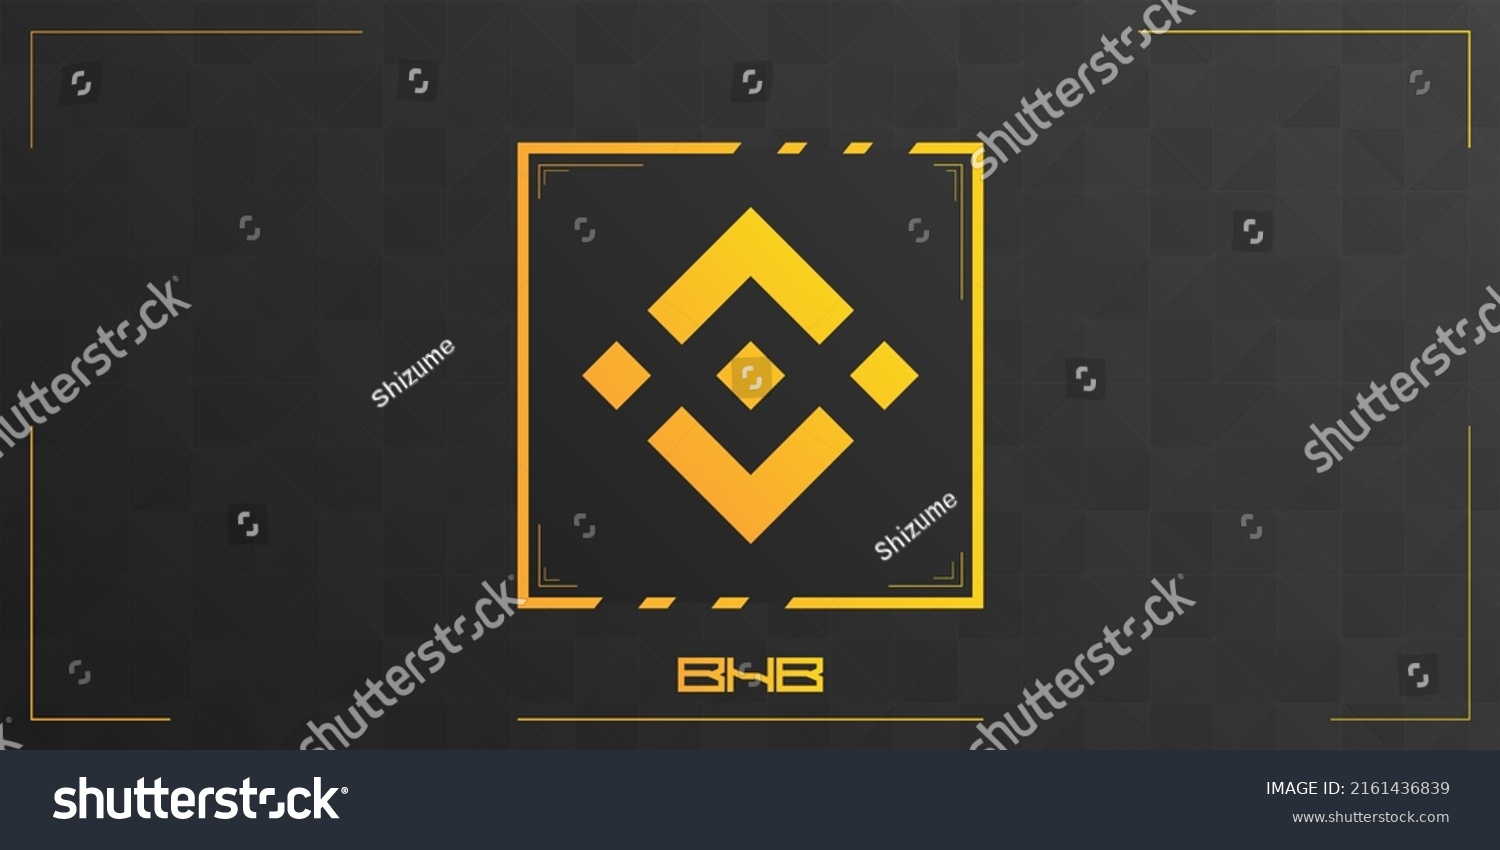 SVG of BNB cryptocurrency colorful logo on dark background with triangles pattern decoration. Vector illustration. svg